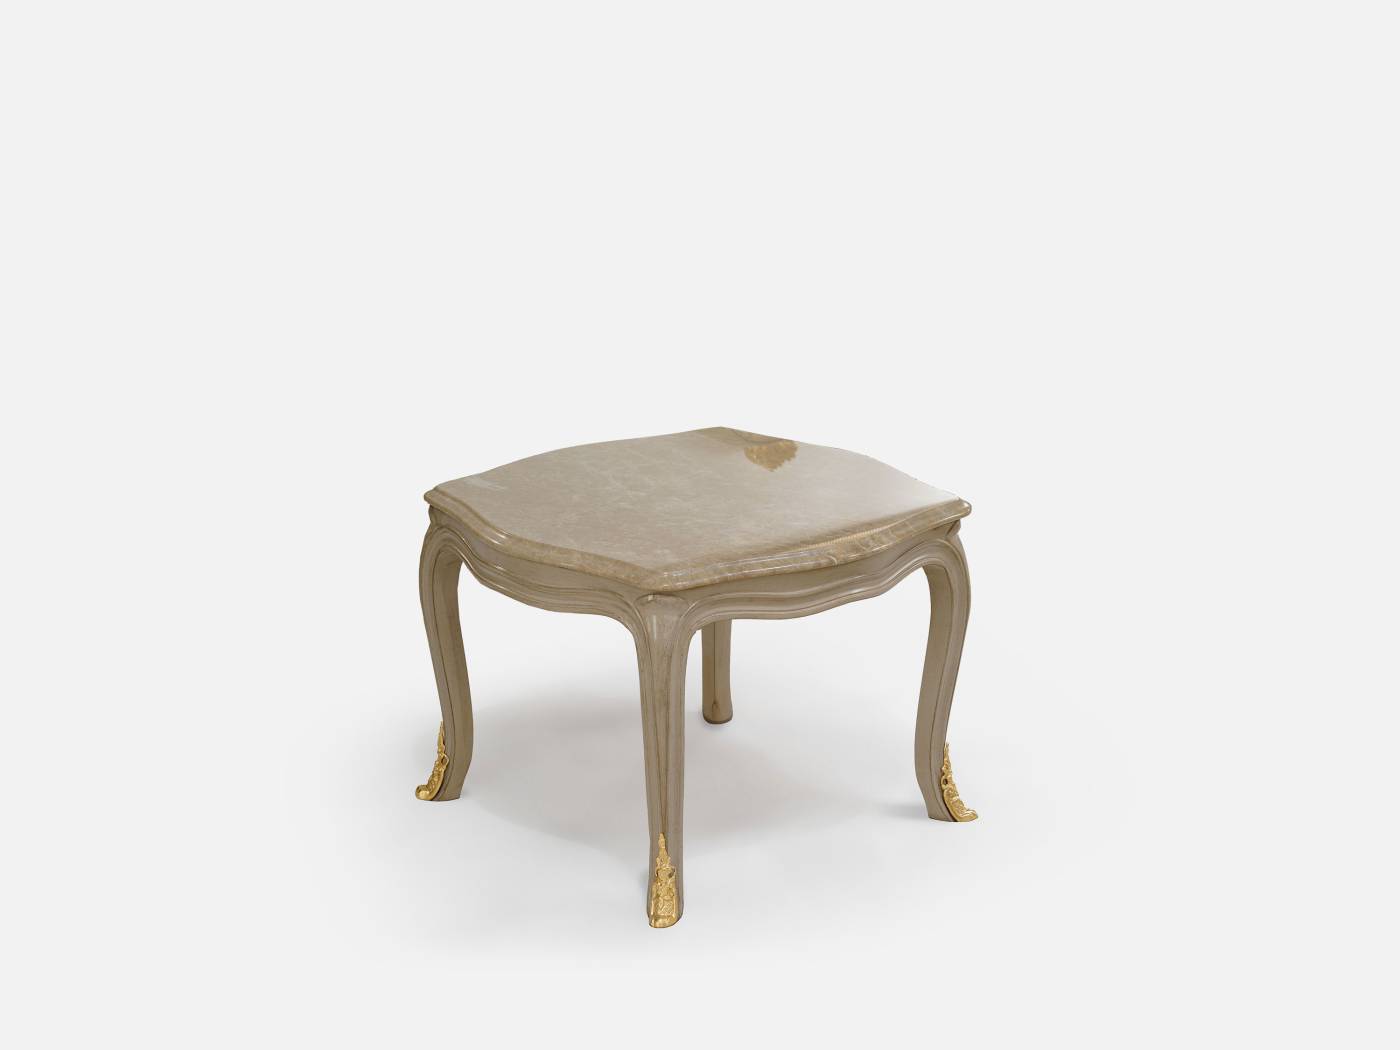 ART. 2202 - C.G. Capelletti quality furniture and timeless elegance with luxury made in italy contemporary Small tables.